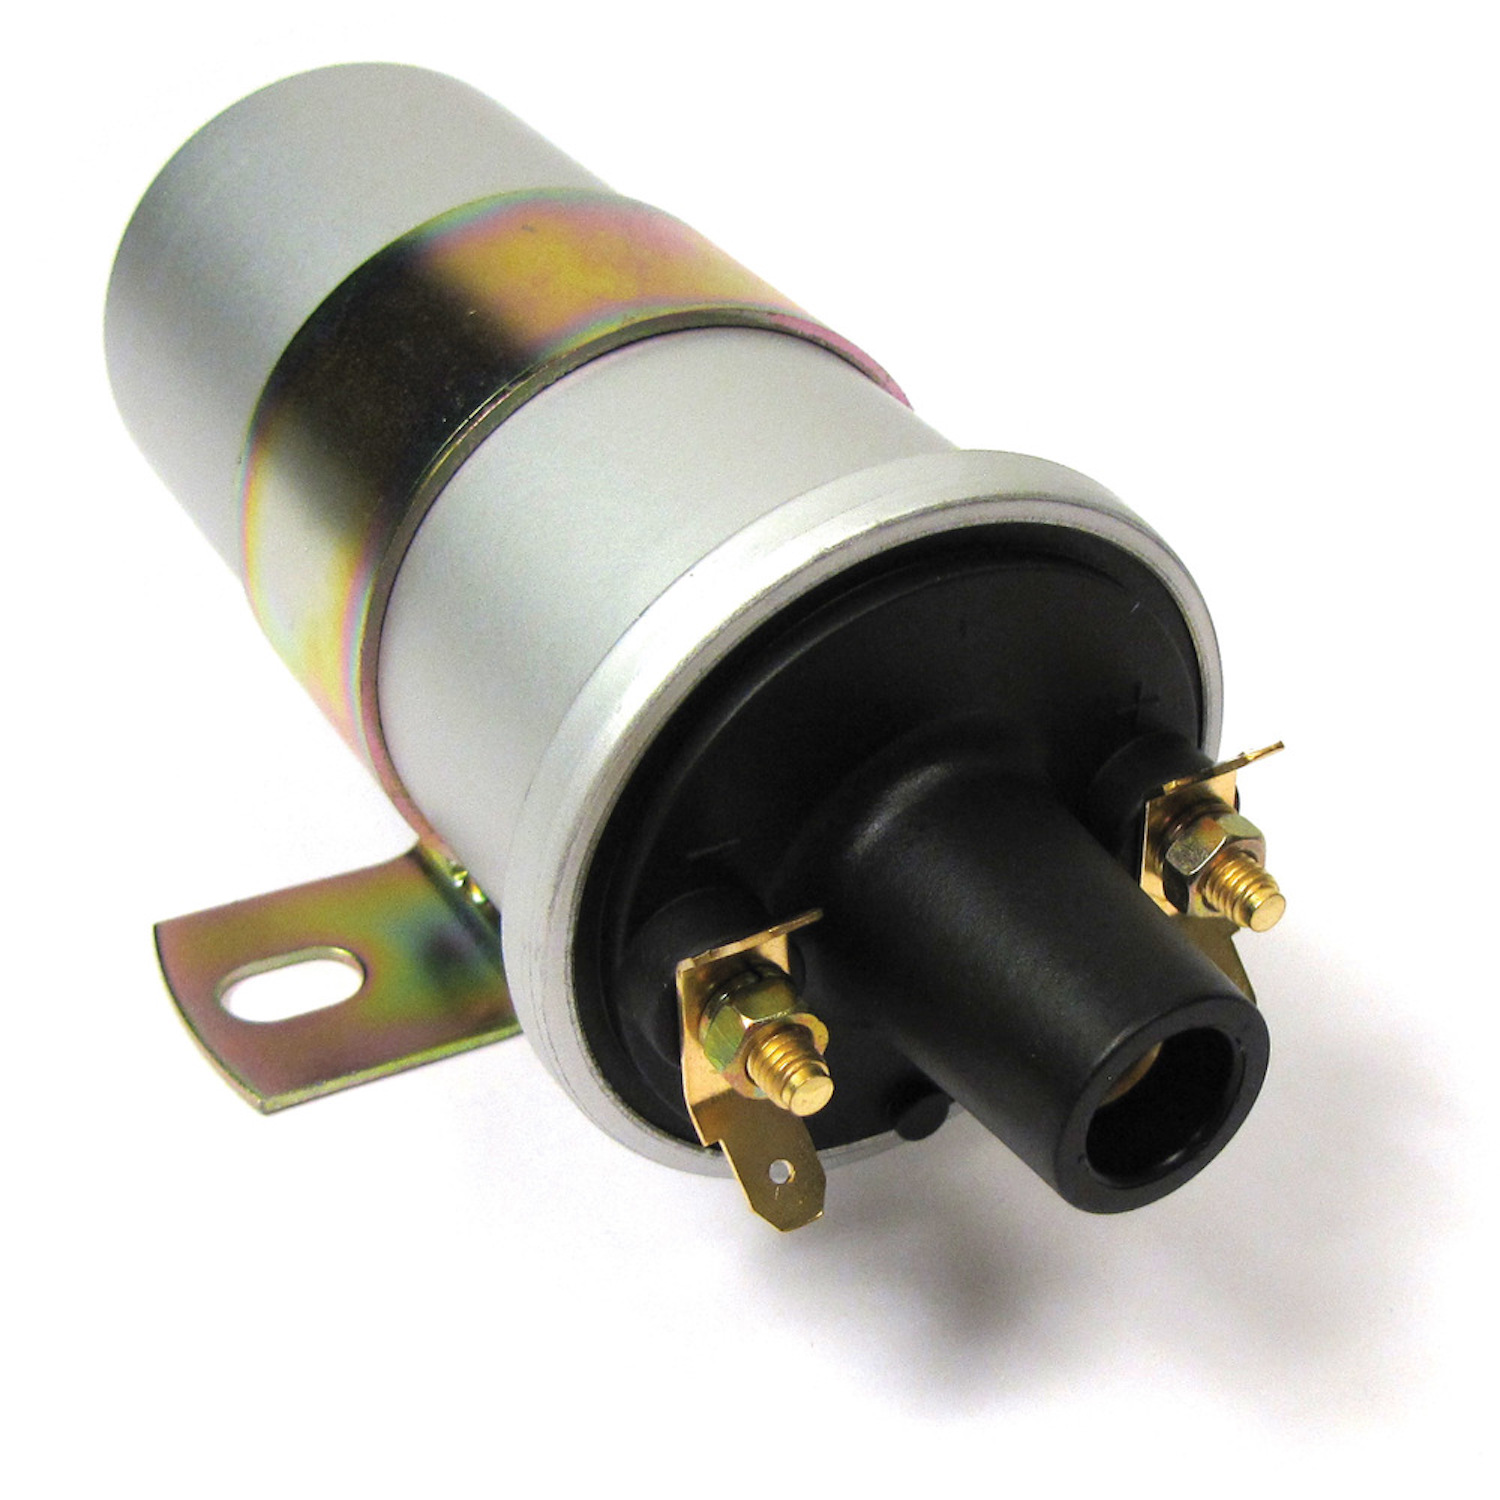 A product photo of a single silver, distributor-type ignition coil.